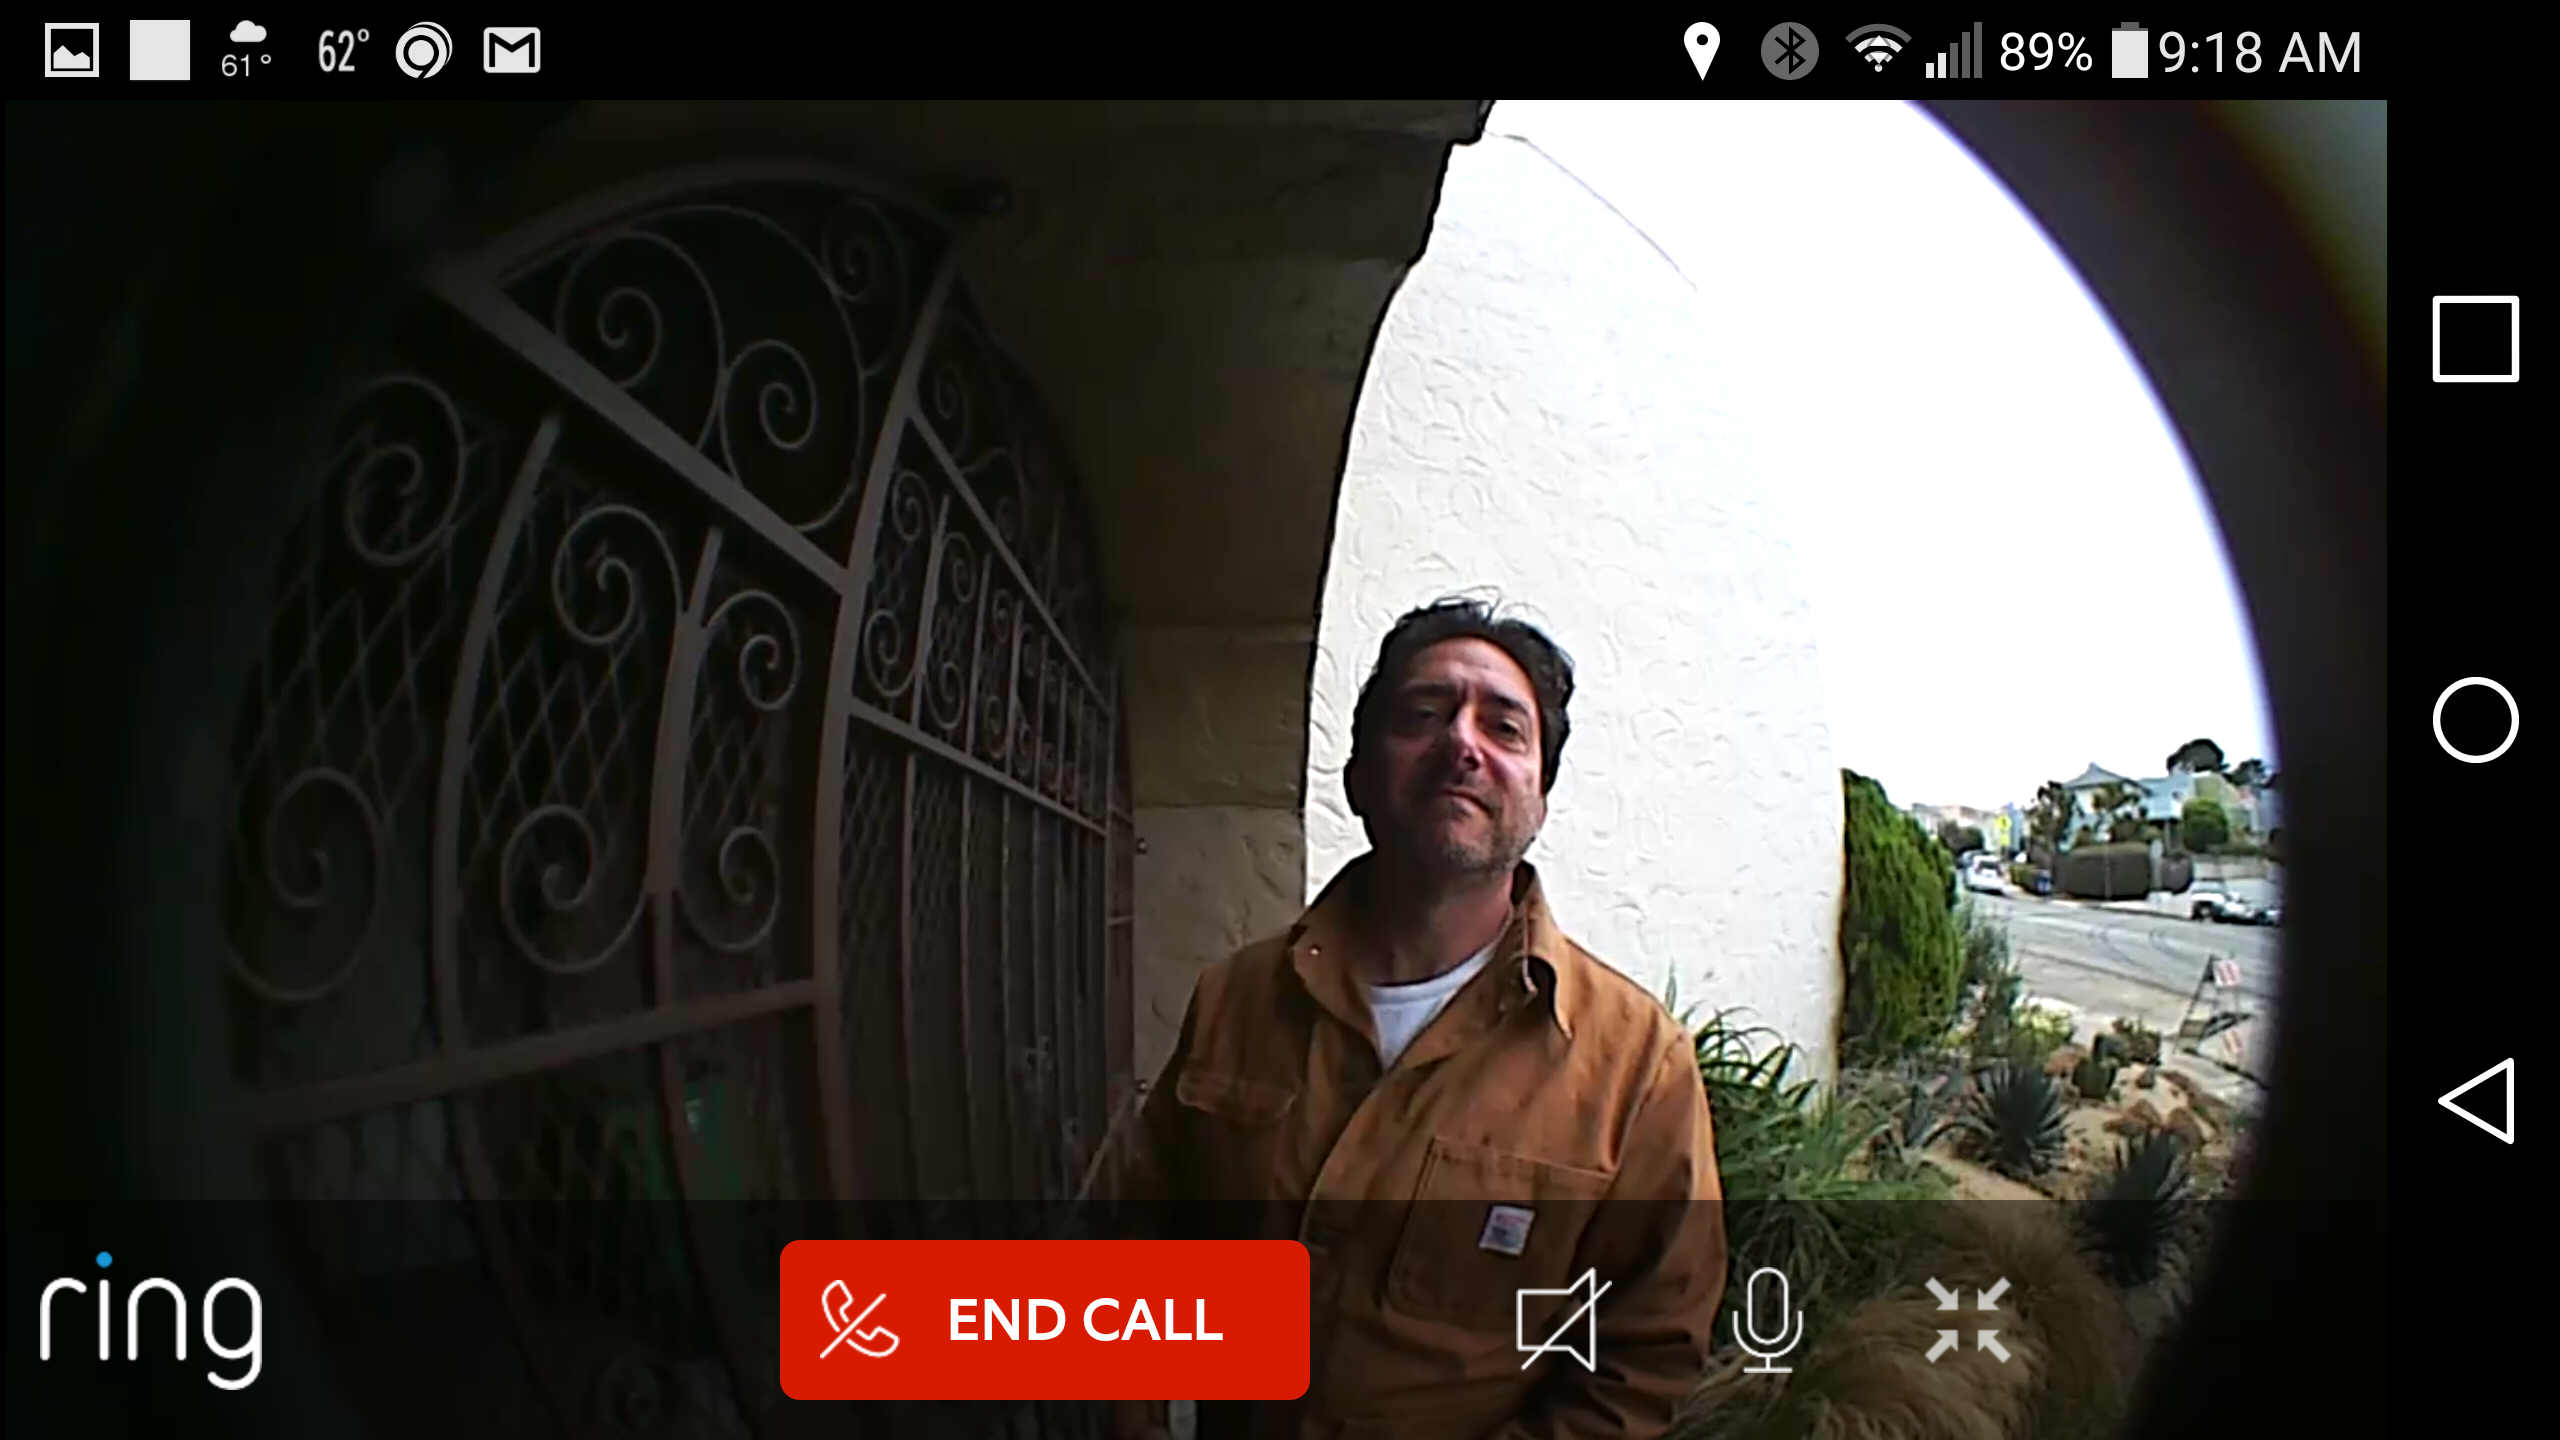 ring video doorbell video quality